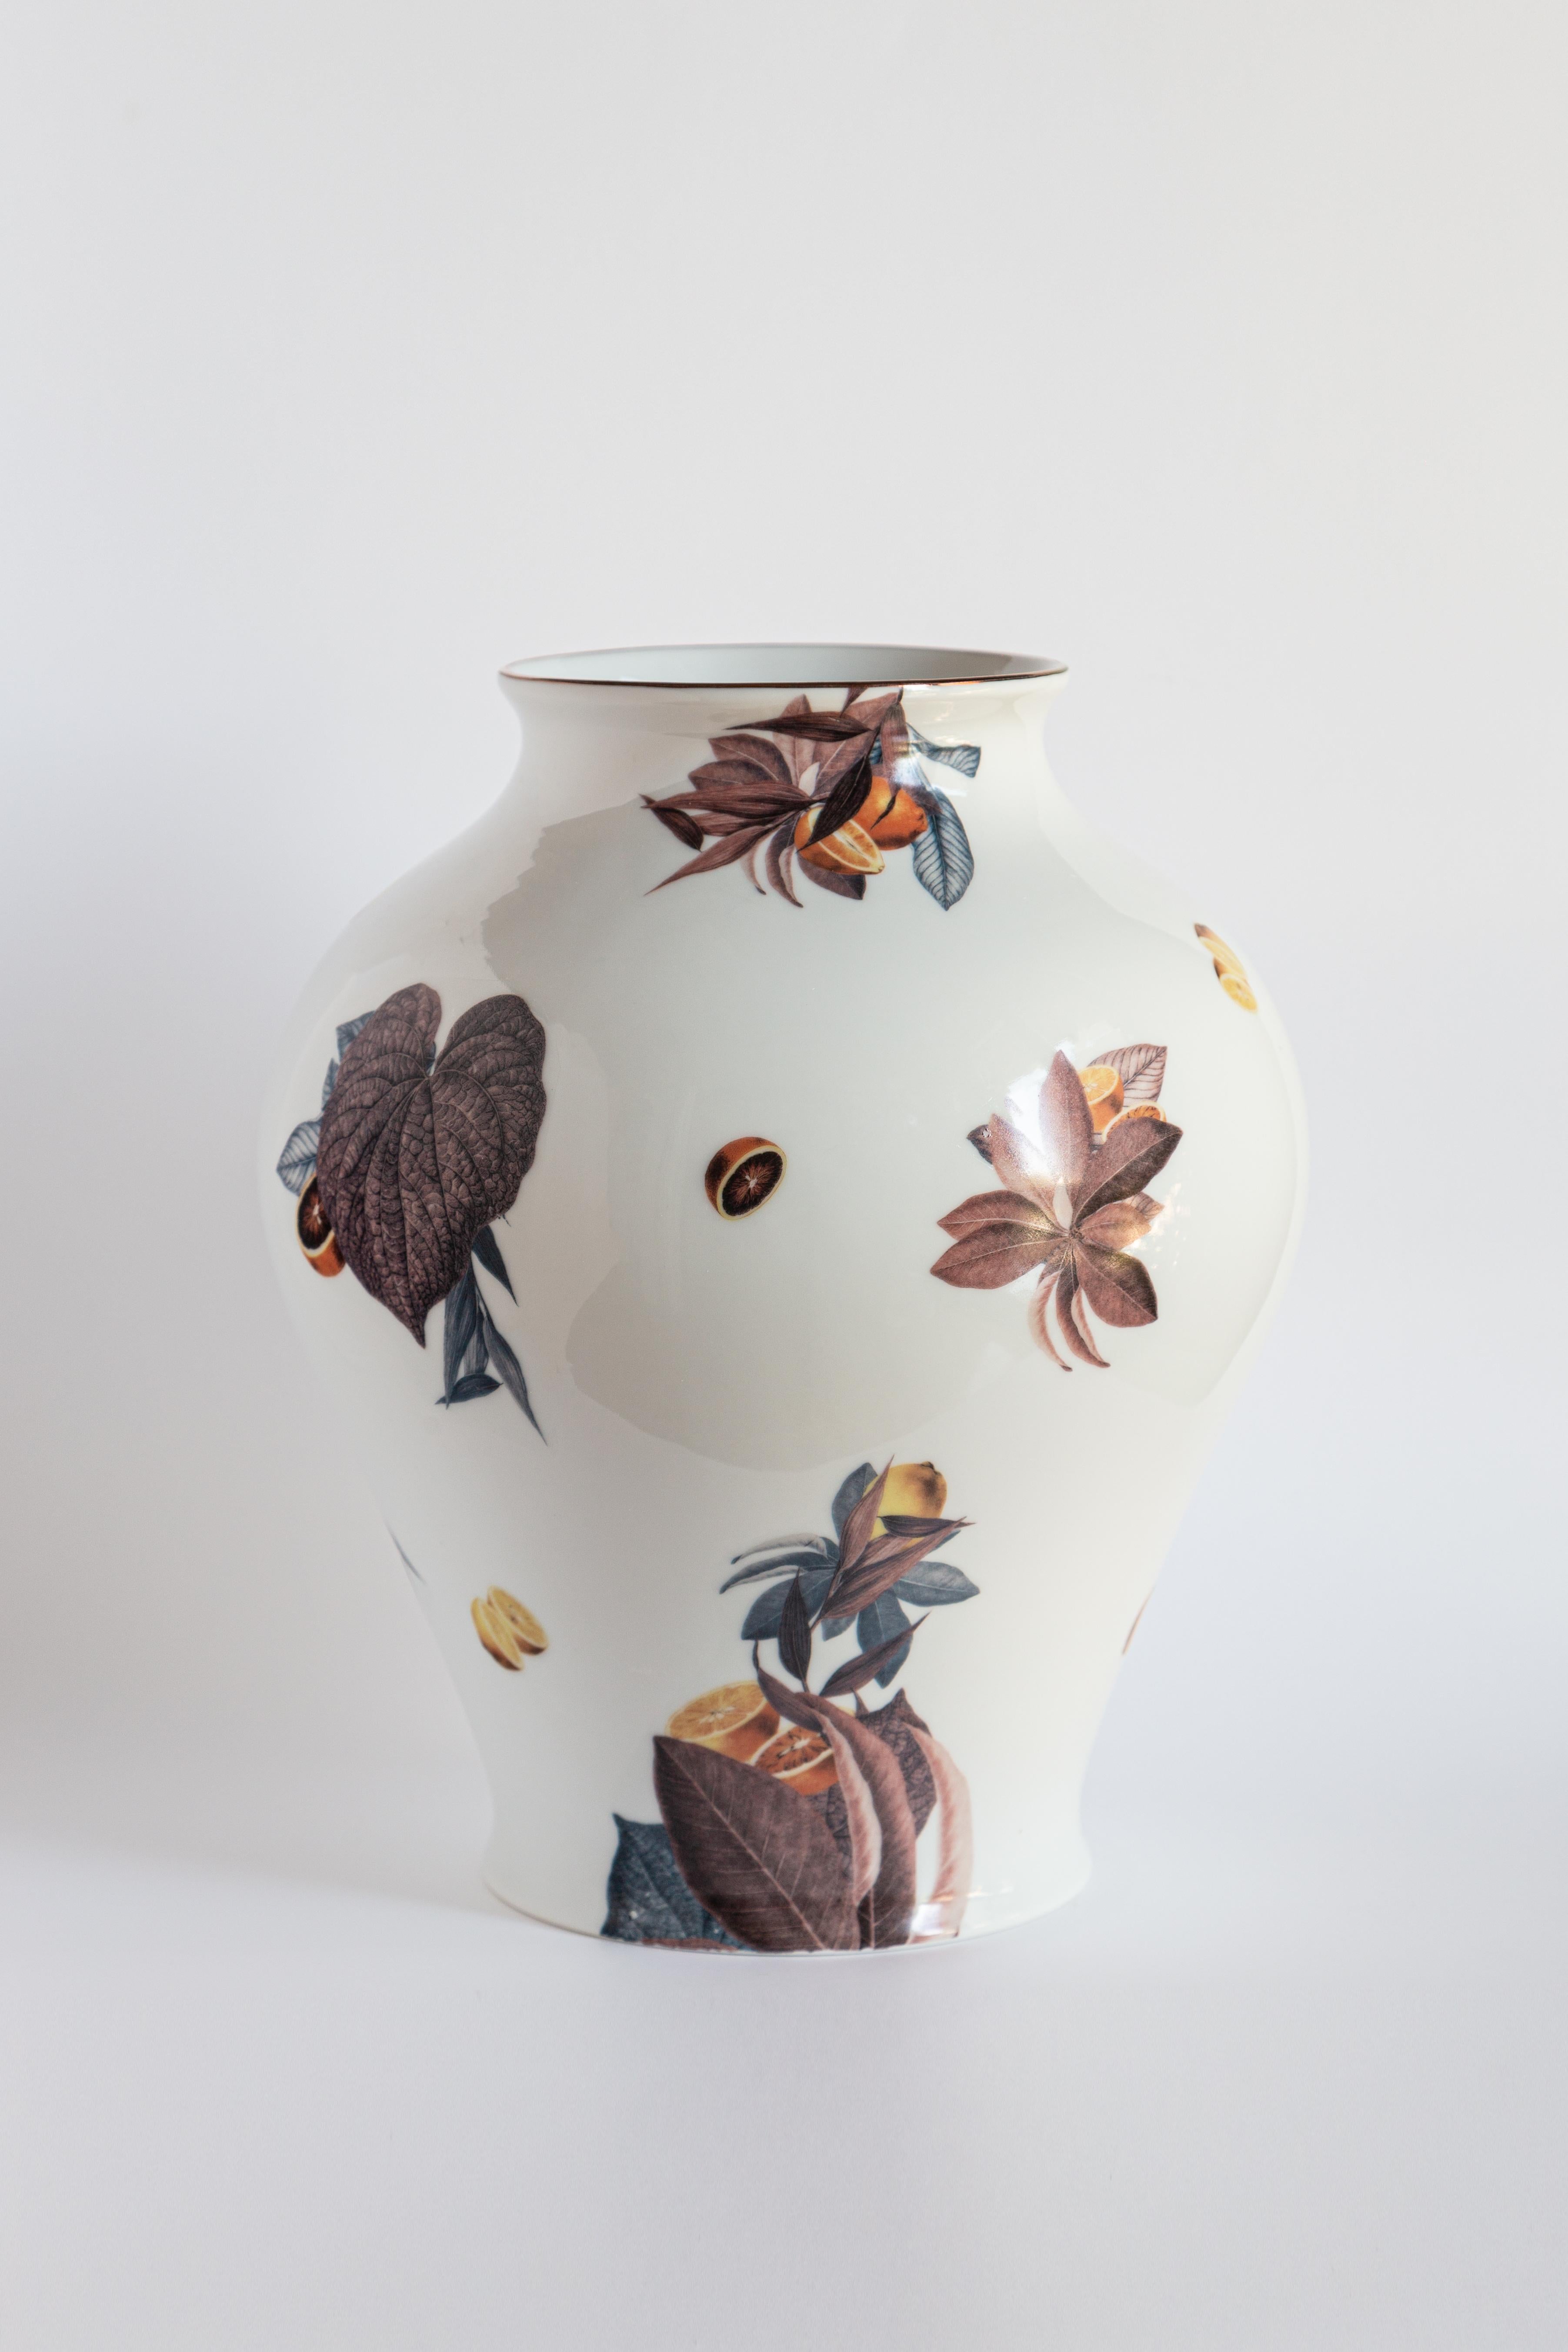 The Classic design of this porcelain vase comes back to life with retro decorations with a contemporary flavor. The Italian coast of Amalfi inspires this design where leaves and citrus fit together and fly all-over the surface.